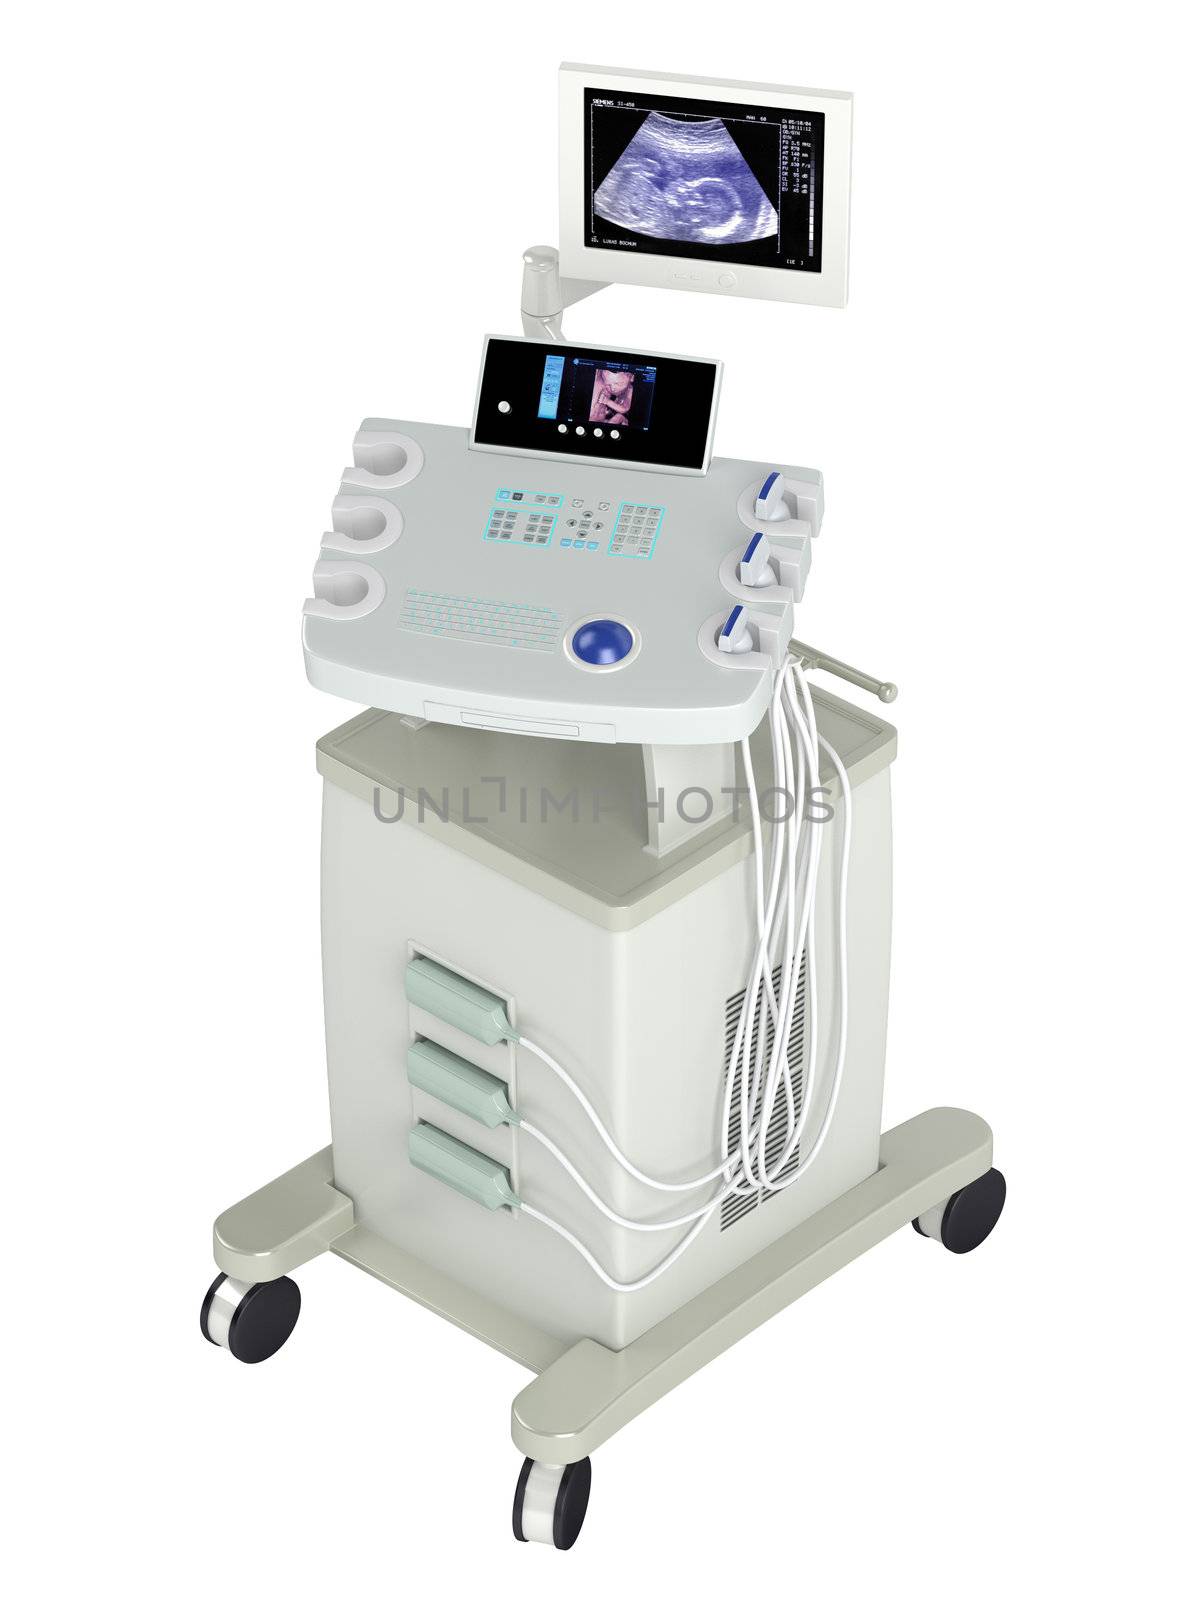 Ultrasound scanner for ultrasonography or sonic imaging based on tissue density as used in prenatal scanning of a foetus, isolated on a white background